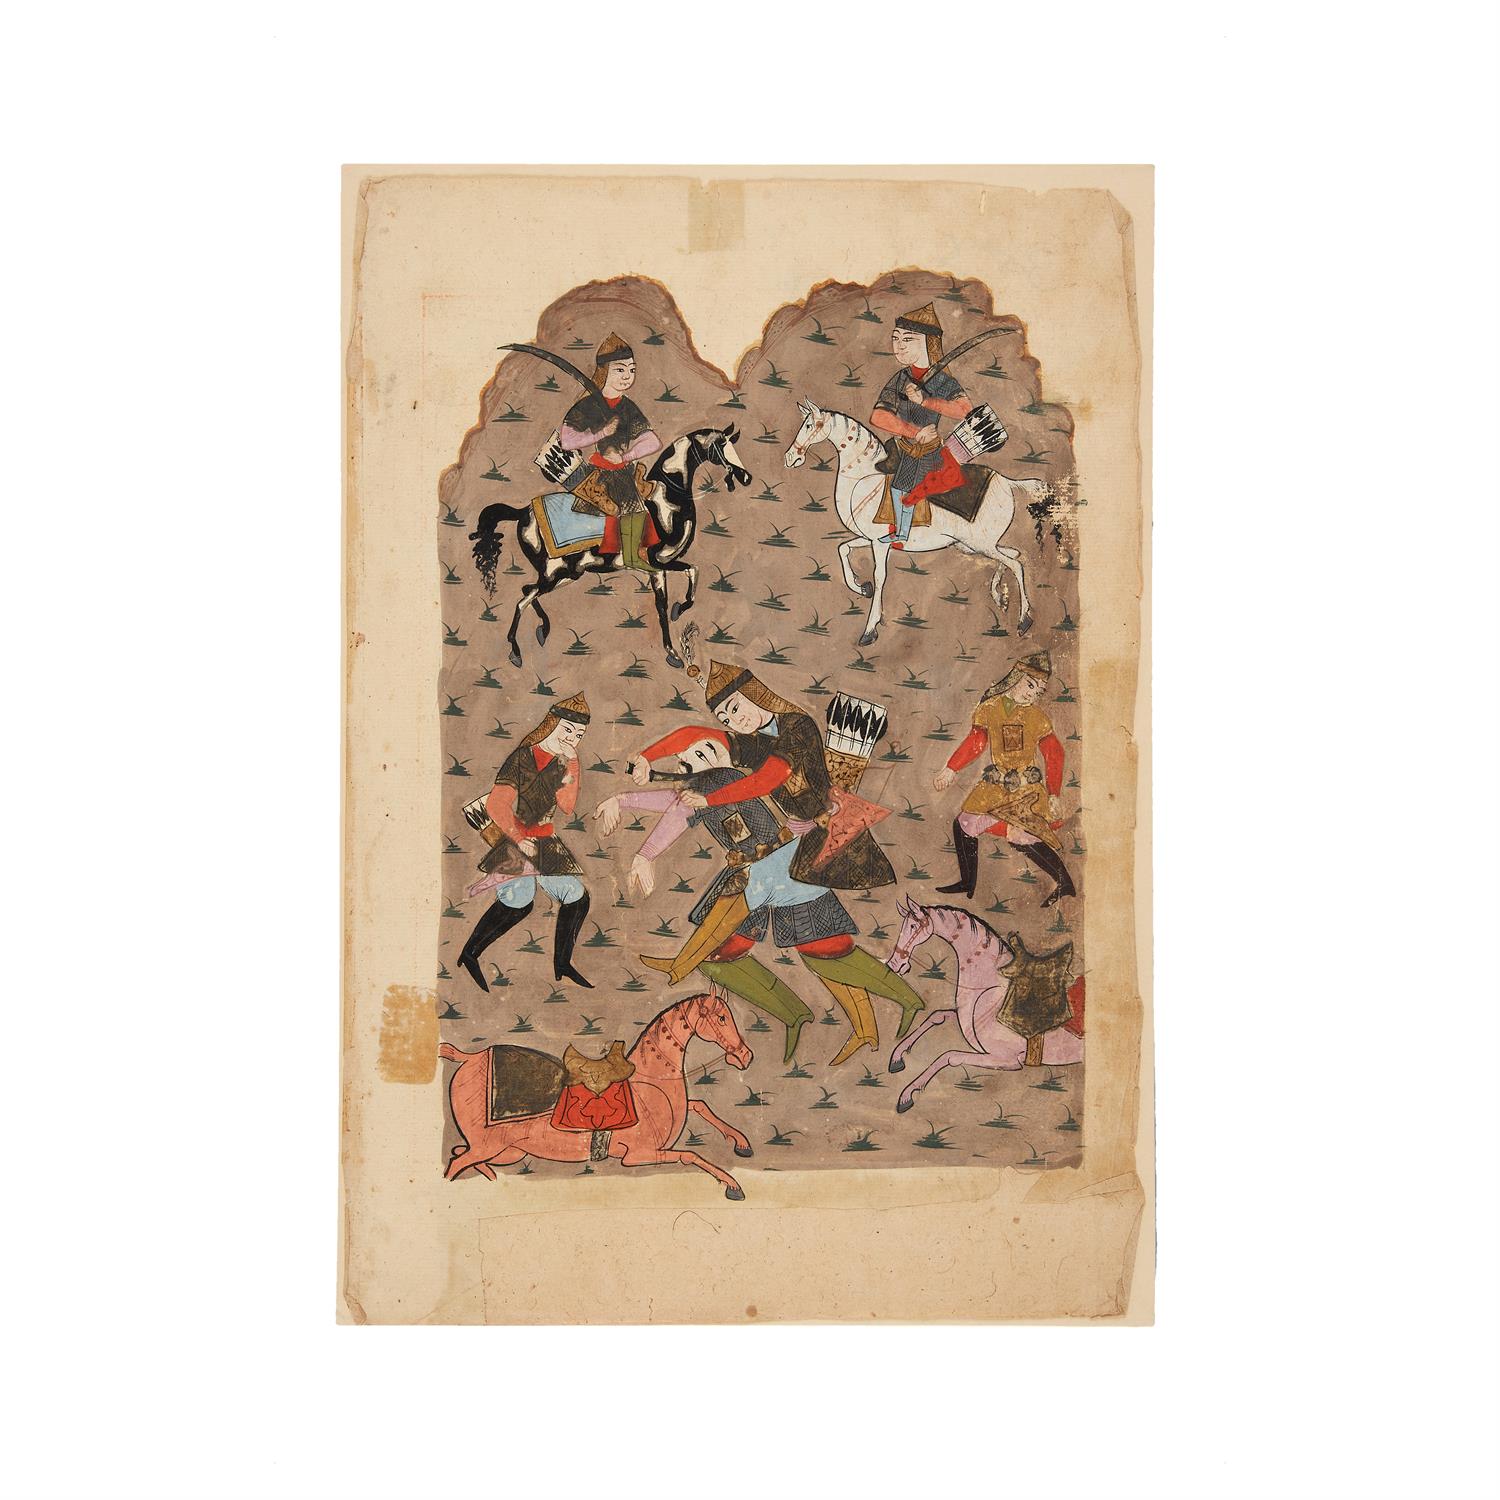 Three full-page illustrations from Shahnameh, miniatures on paper [India (Deccan), c. 1700] - Image 2 of 3